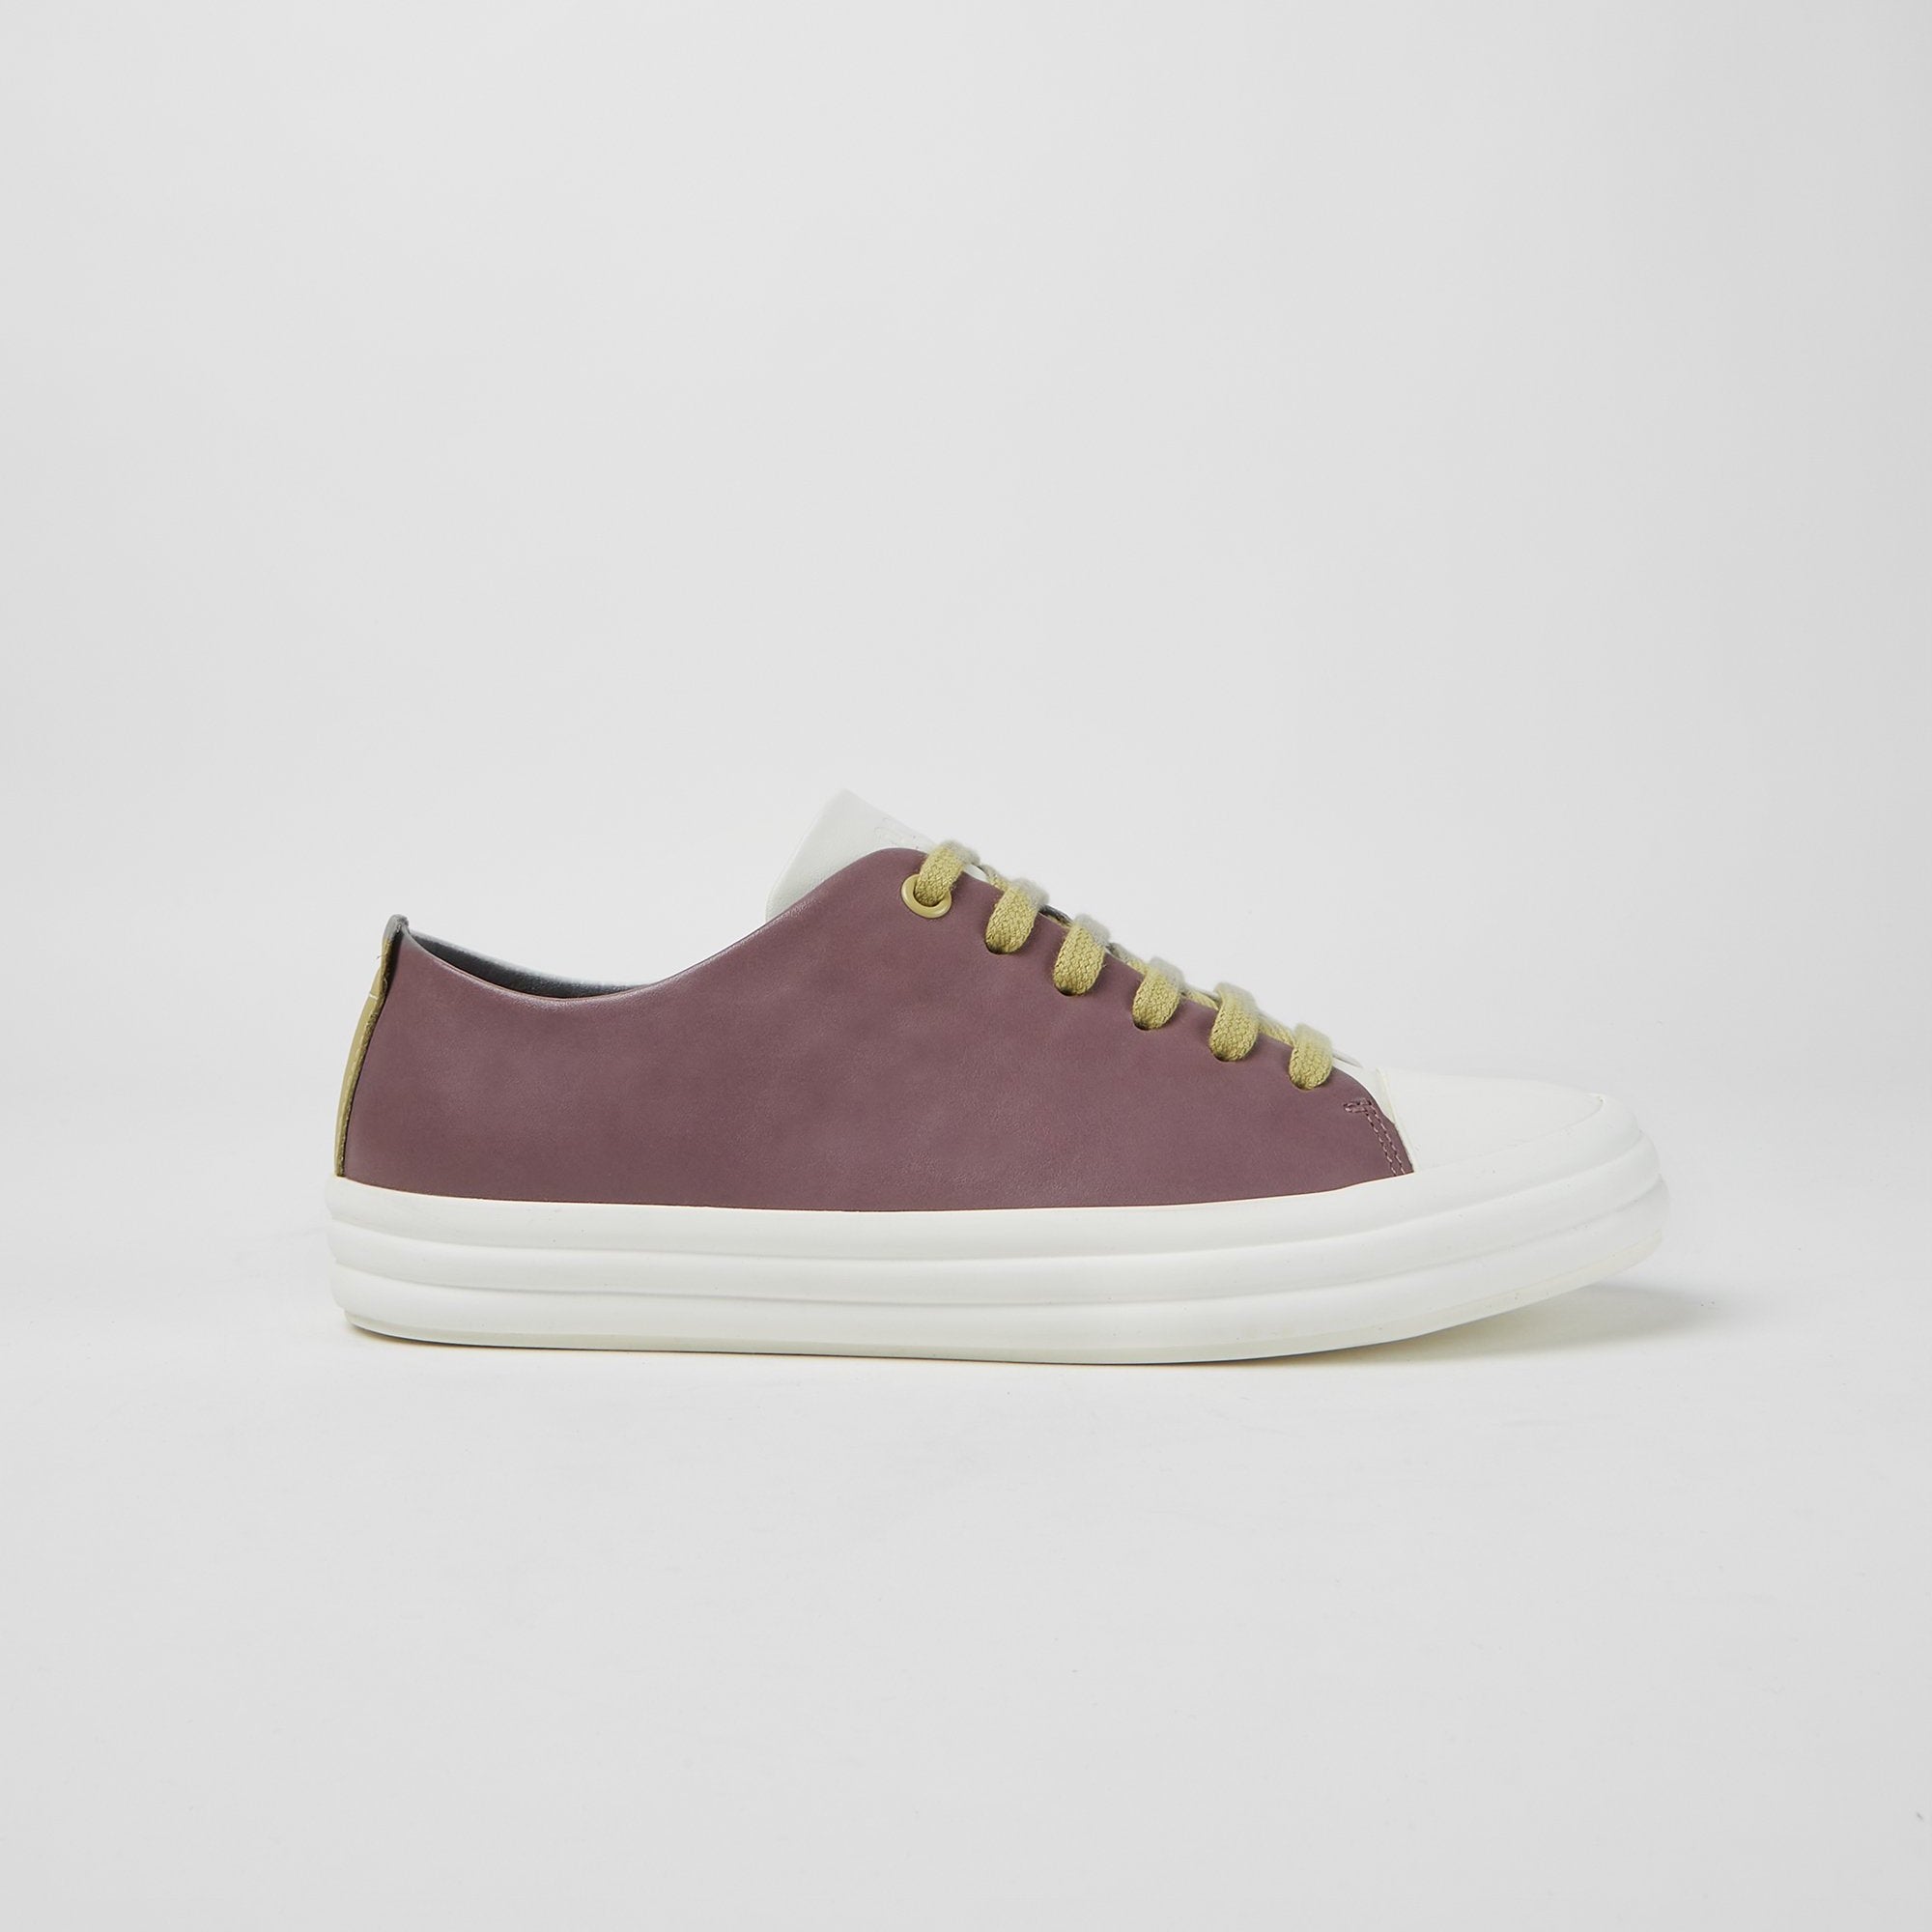 Outer side view of the right foot of the camper twins sneaker. The outer side of the right foot is purple with a white toe and sole. The laces are mustard colored.